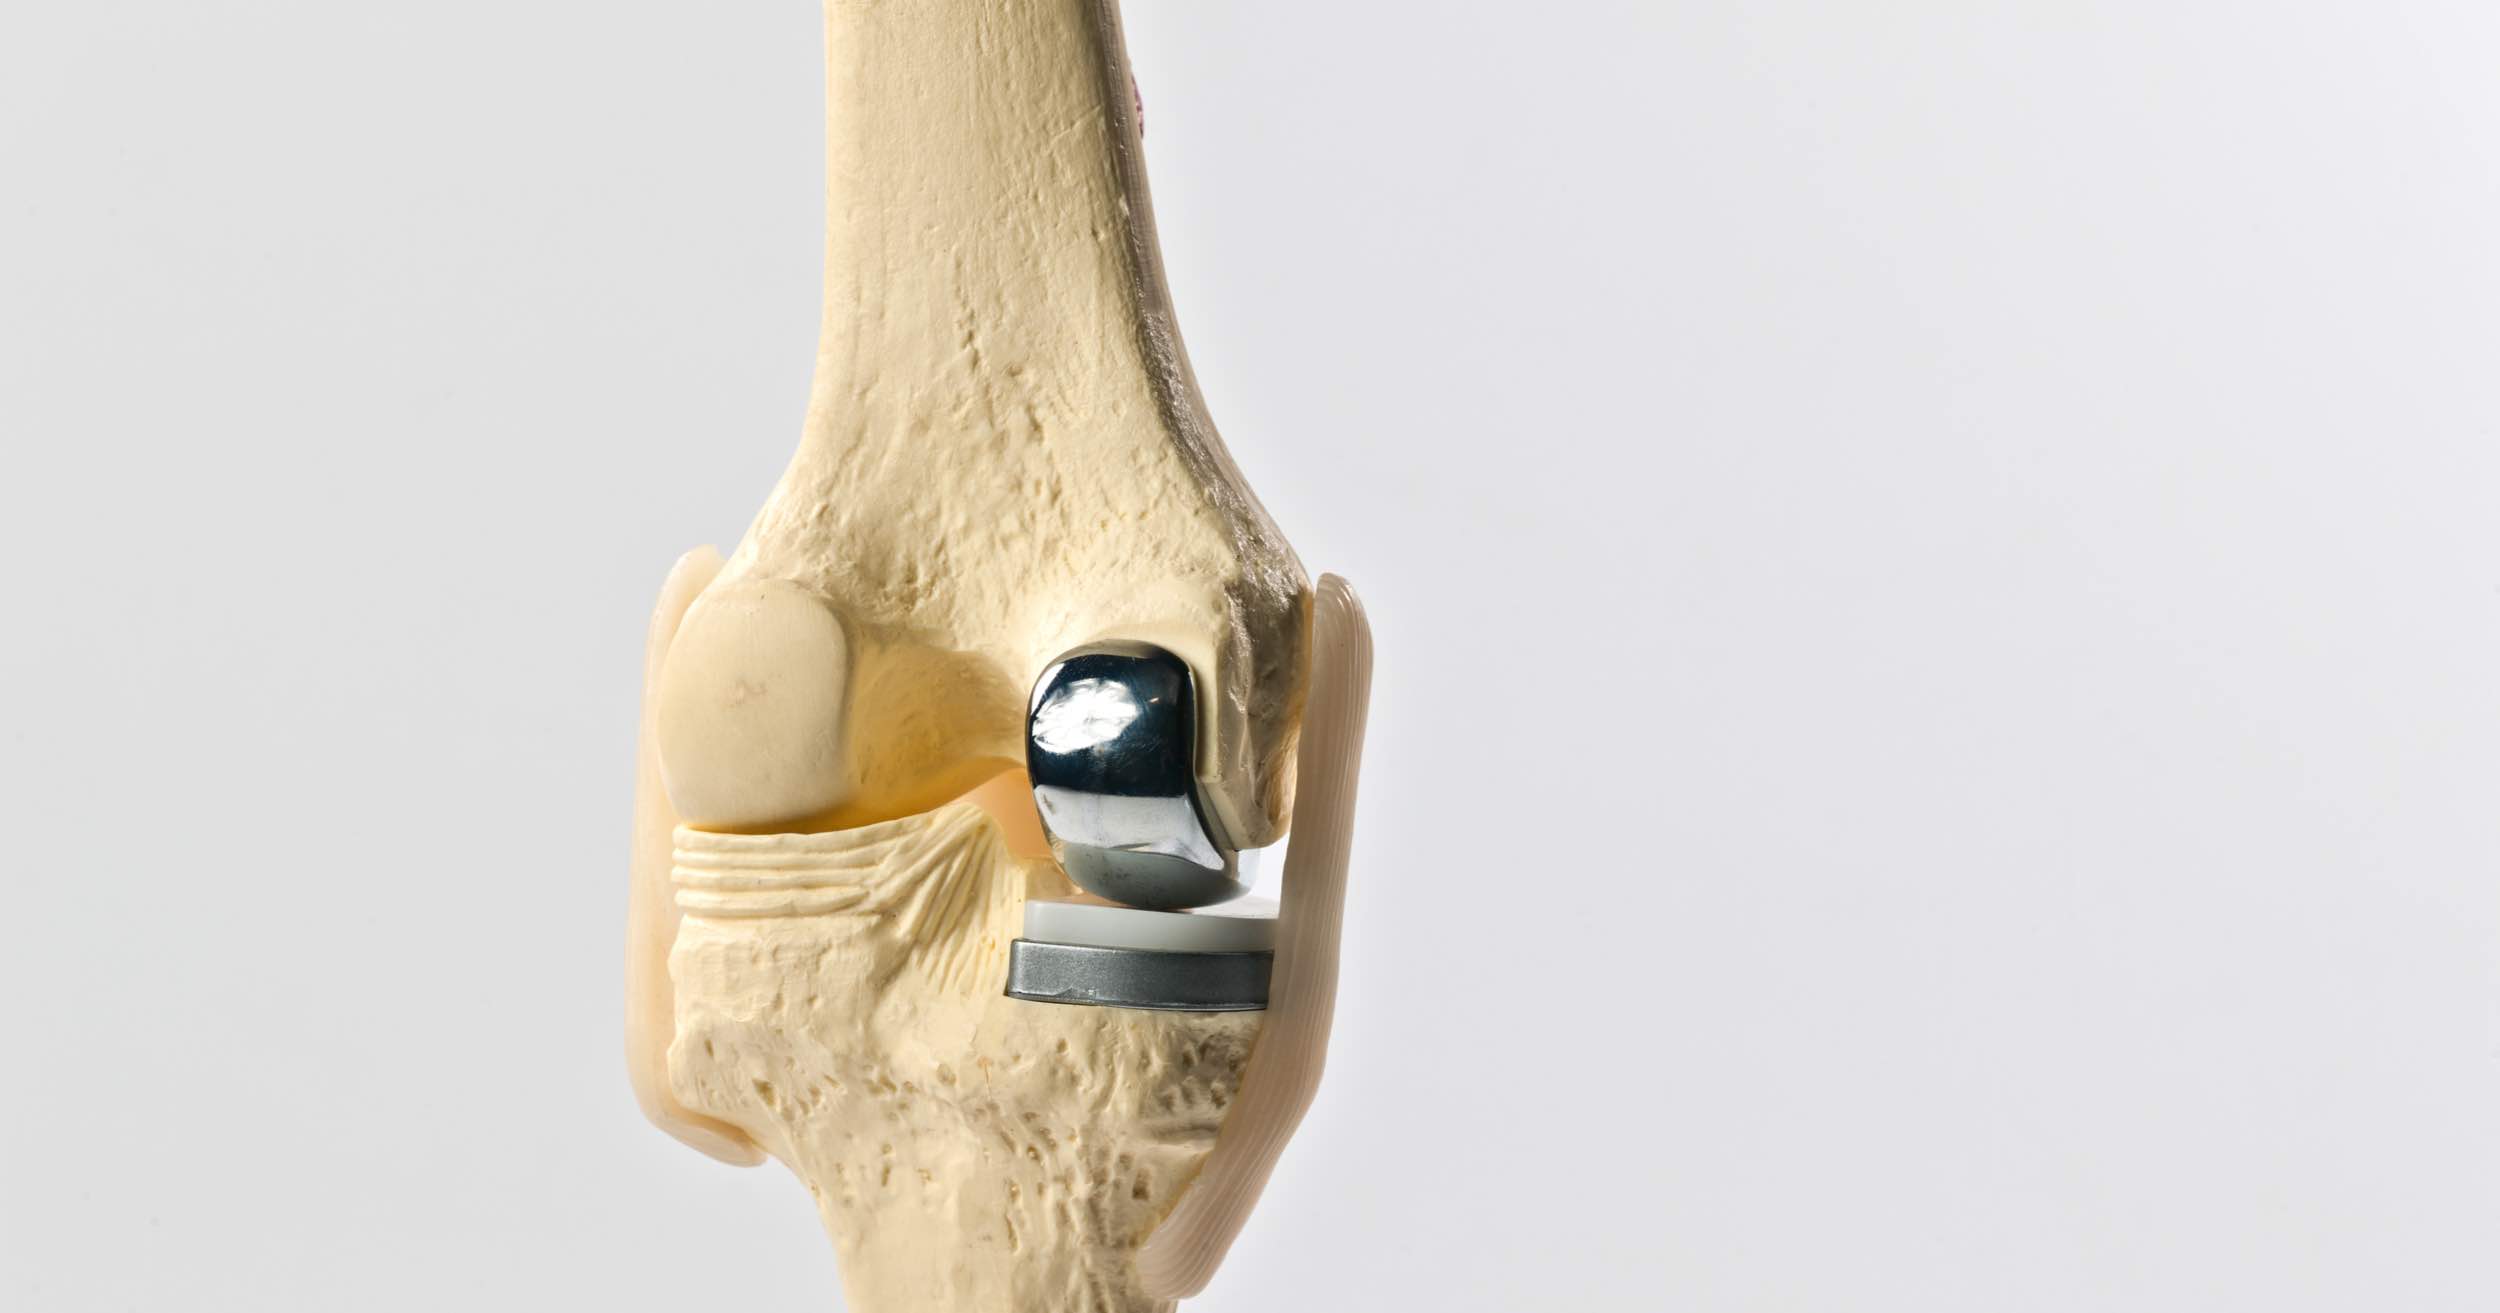 Knee Surgery 101: Partial Knee Replacement